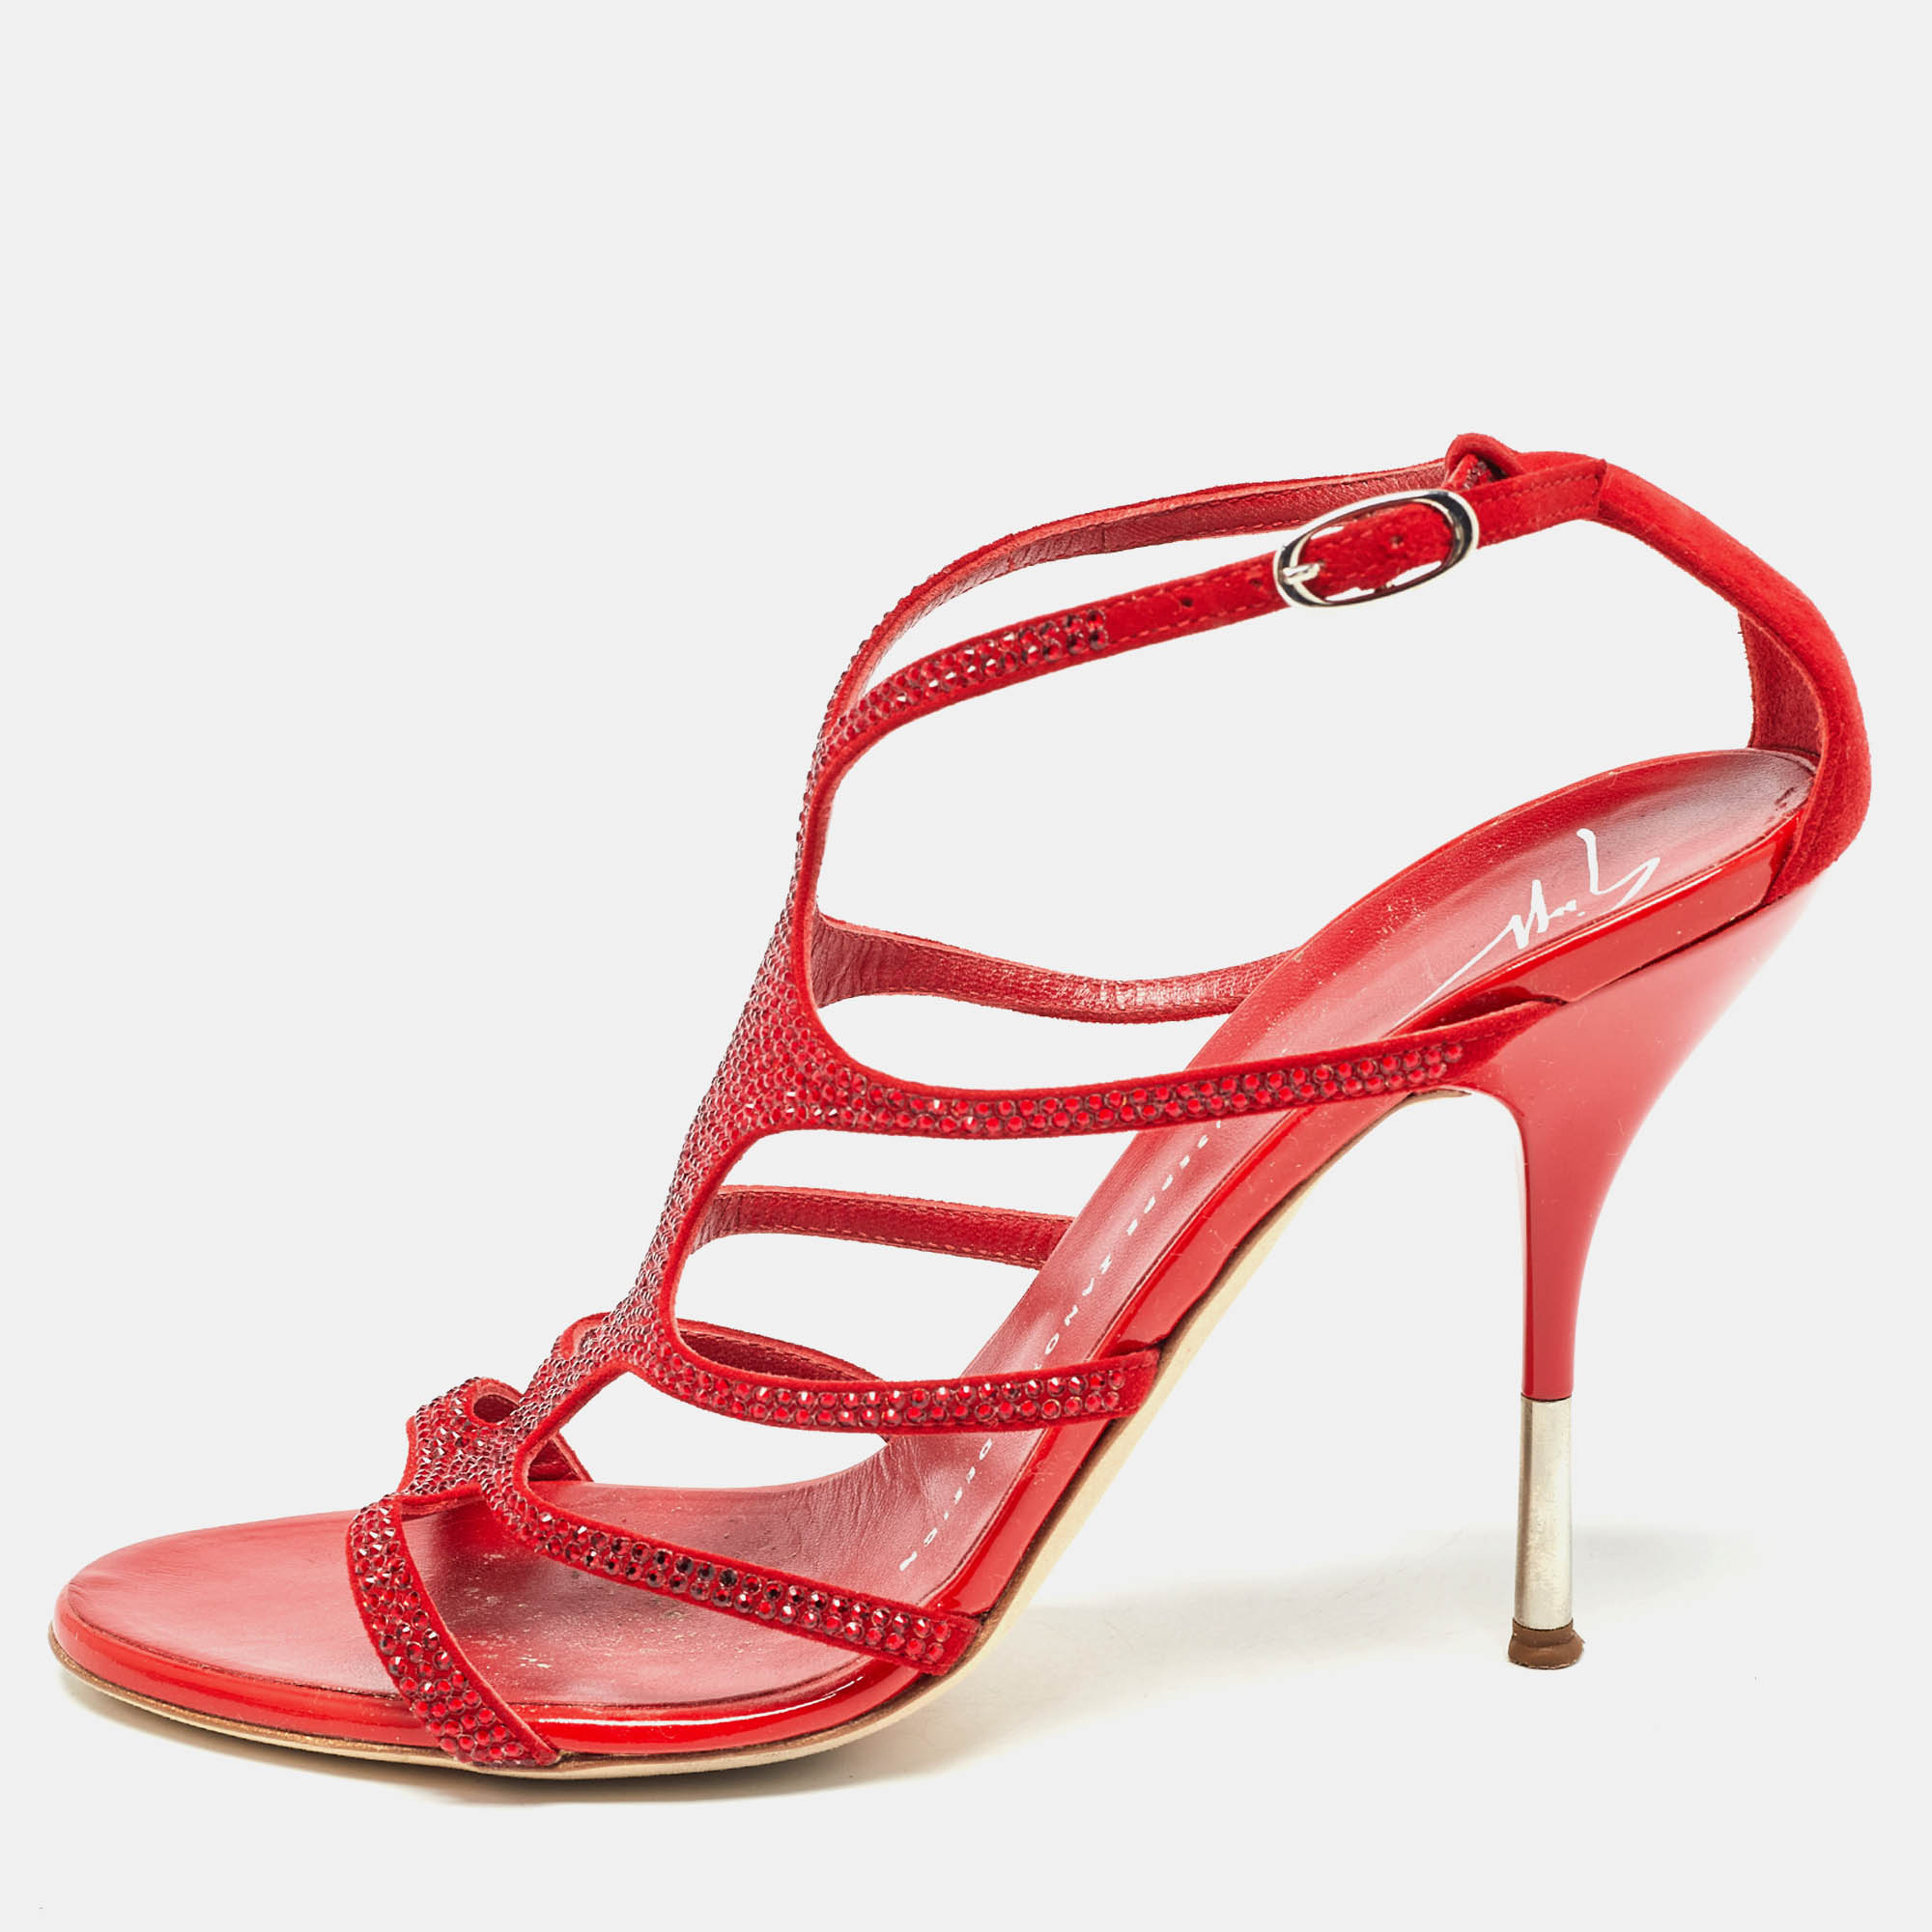 Giuseppe zanotti red crystal embellished suede strappy sandals size 37